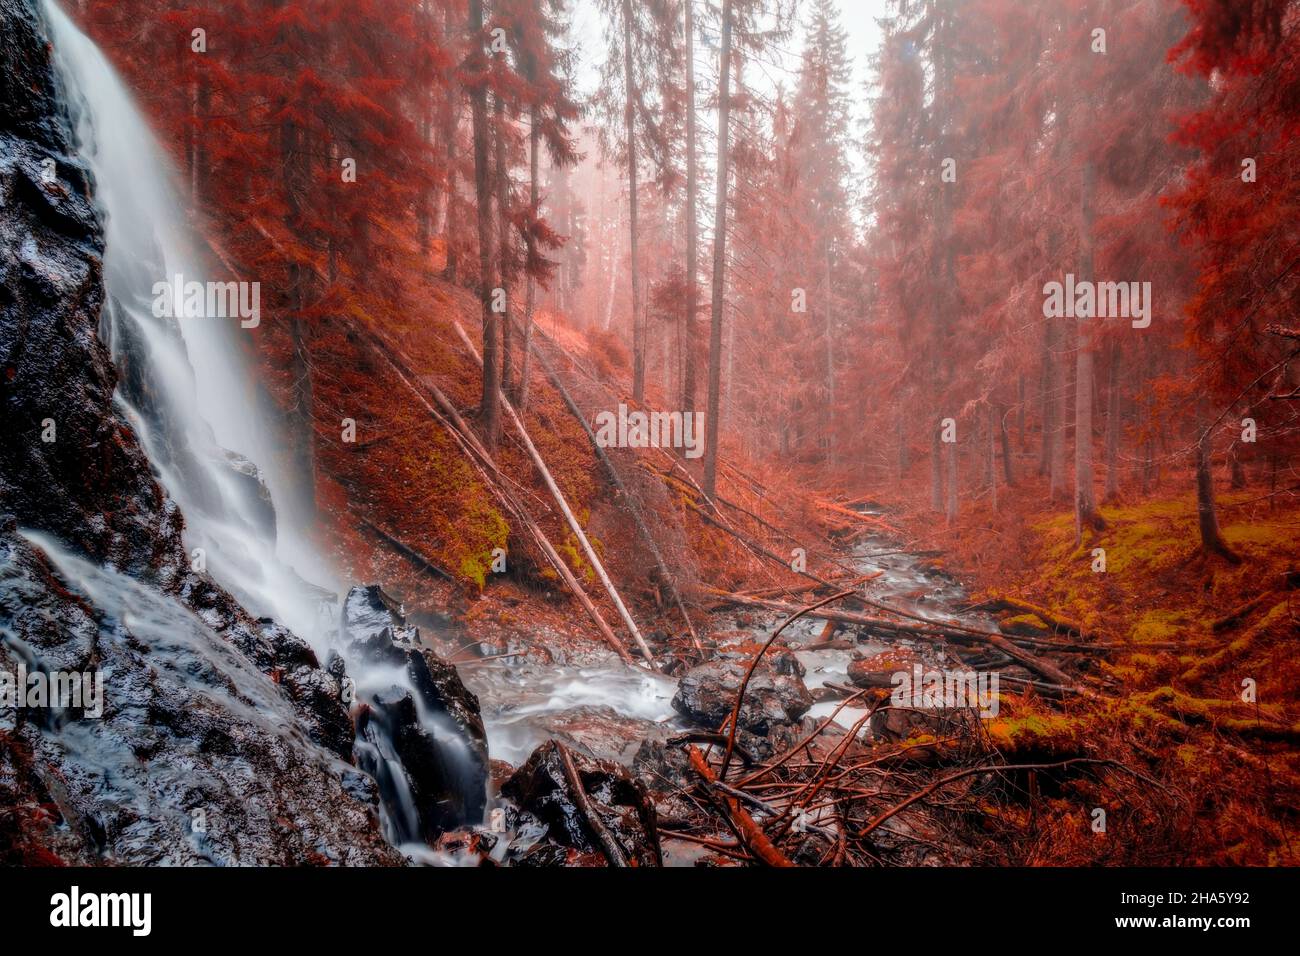 waterfall with rocks and trees in autumn with mist Stock Photo